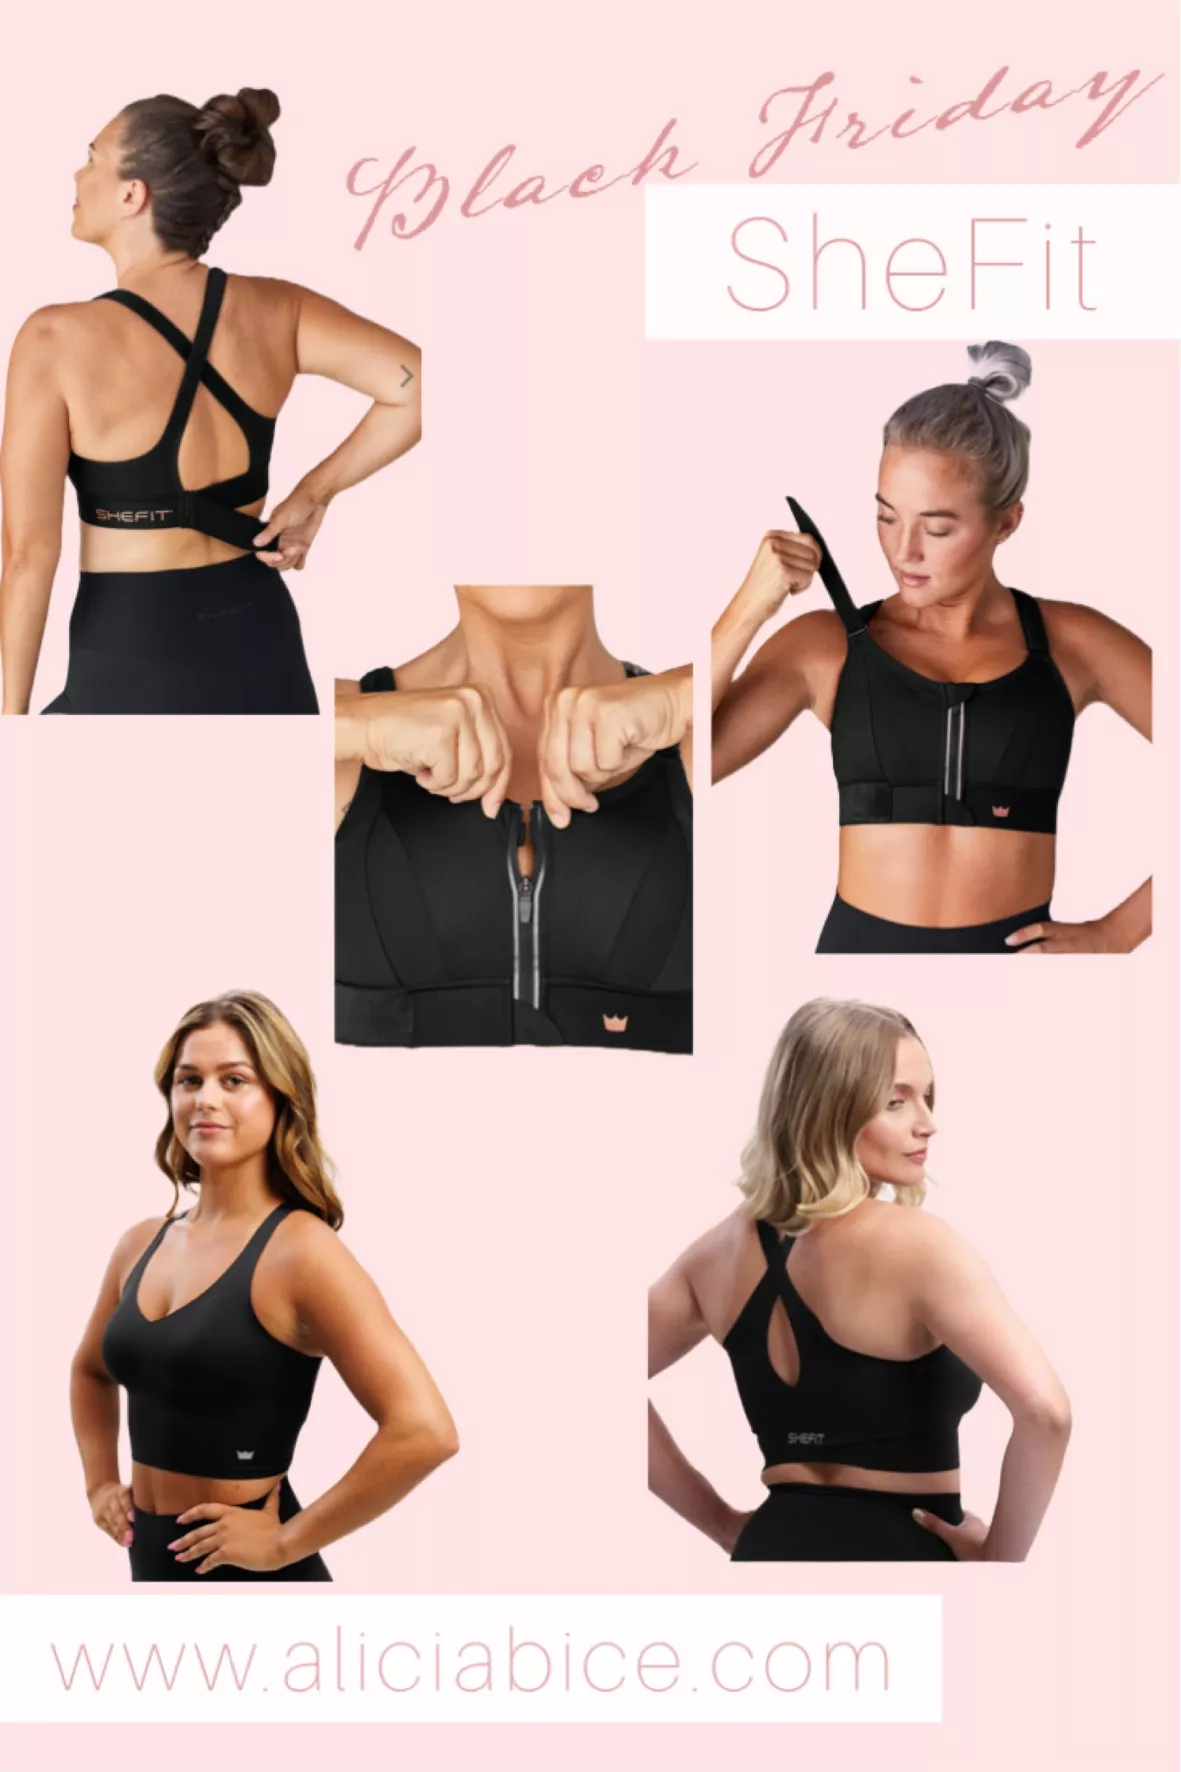 All Black Friday Deals, All Offers, Sports bras